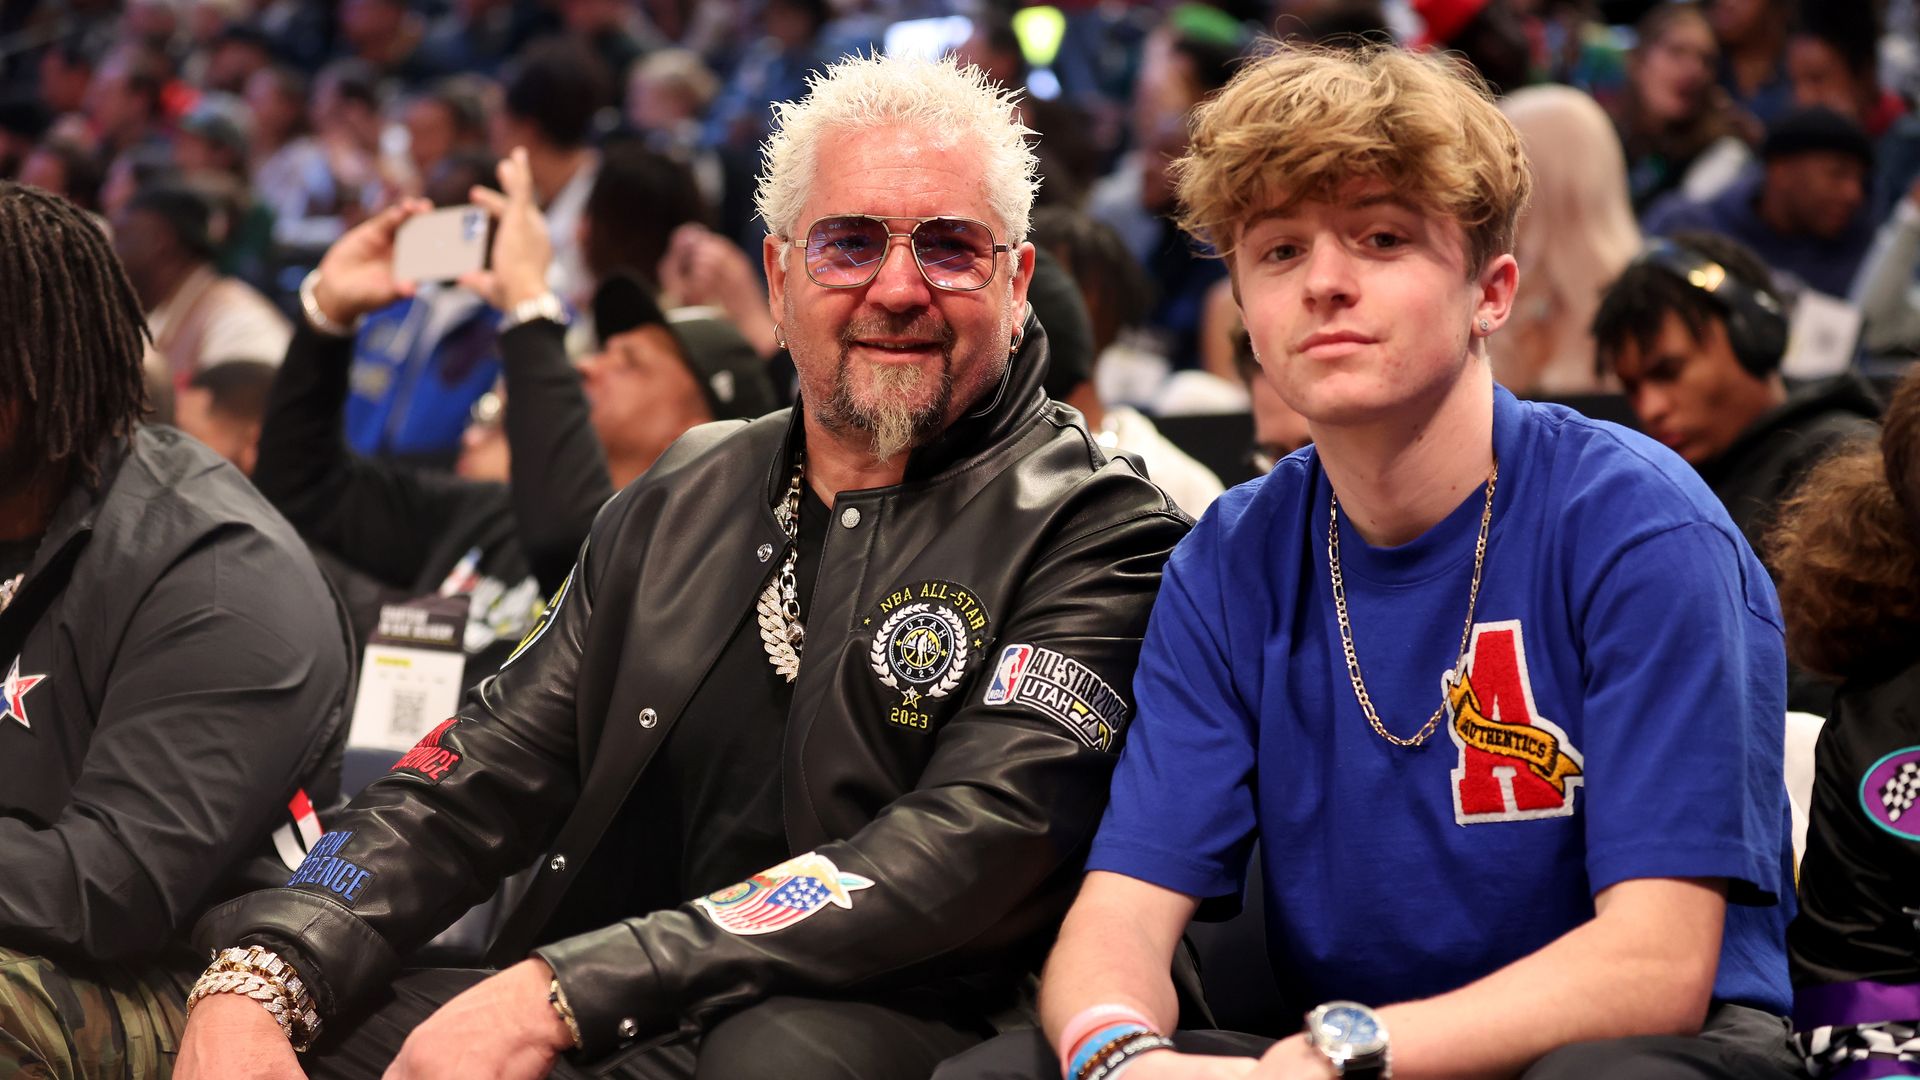 Guy Fieri poses with his son Ryder Fieri prior to the 2023 NBA All Star Game between Team Giannis and Team LeBron at Vivint Arena on February 19, 2023 in Salt Lake City, Utah